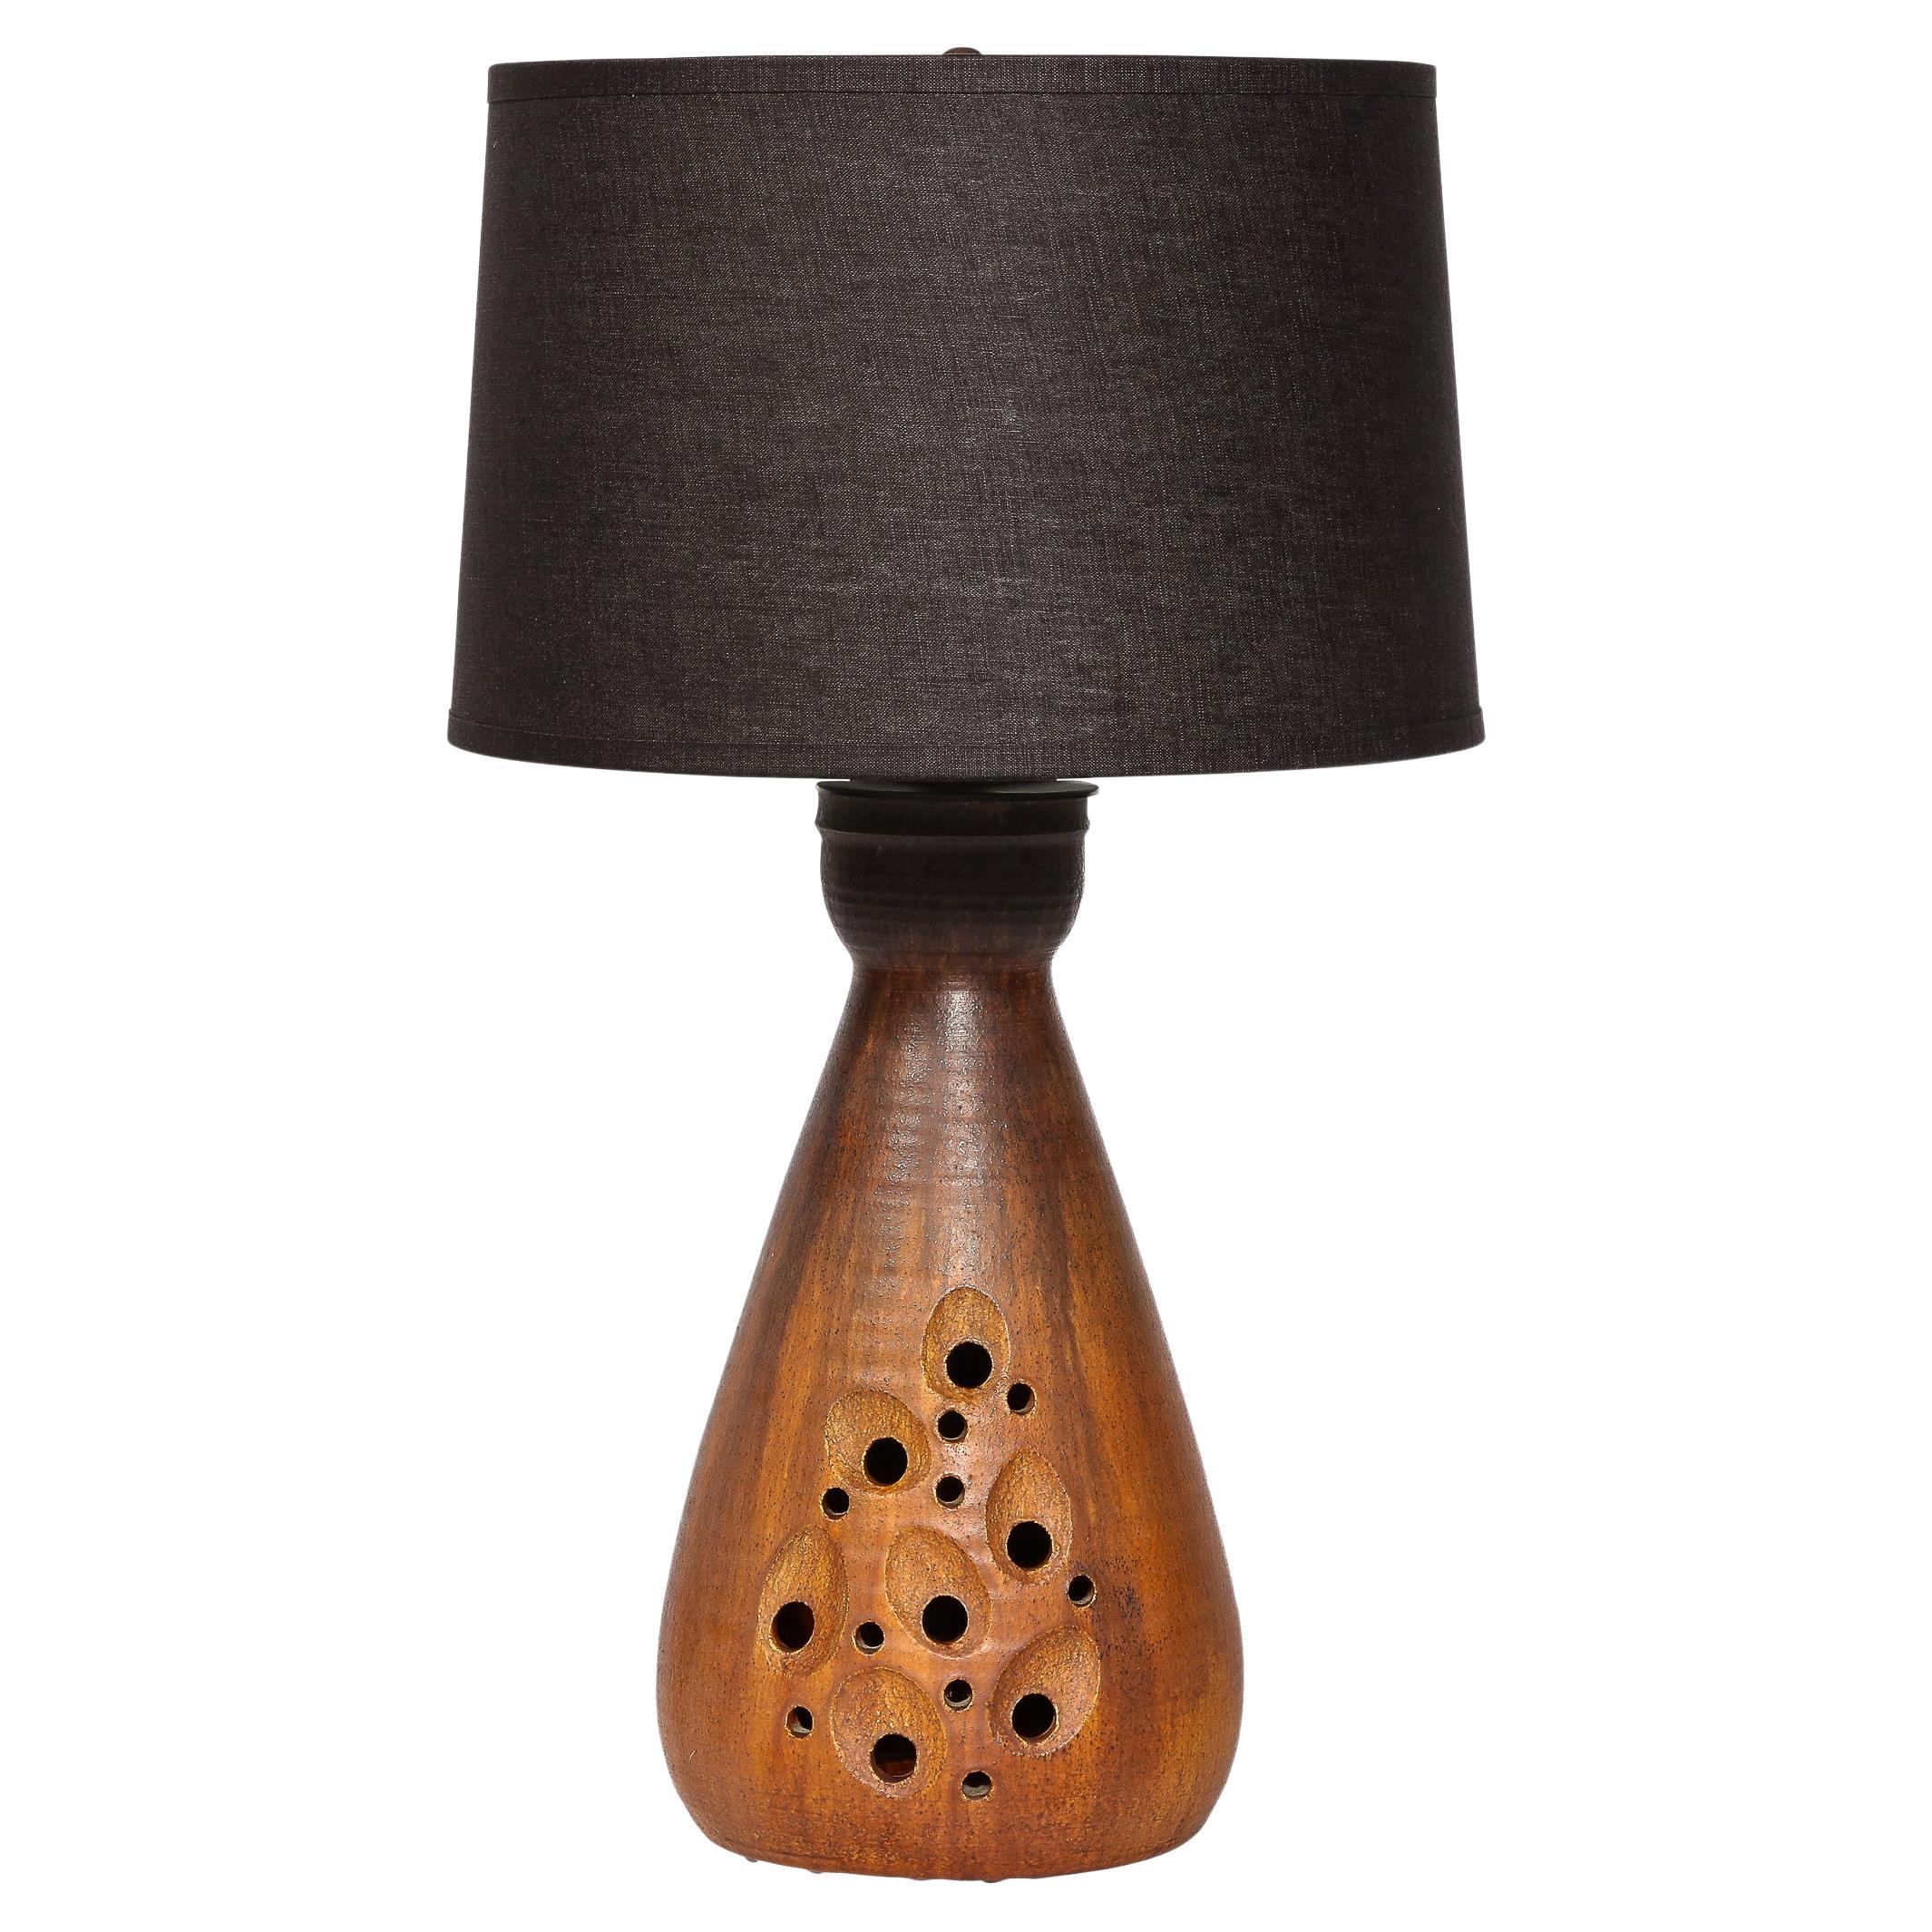 Mid-Century Modernist Ceramic Table Lamp in Slate and Red Iron Oxide Glaze